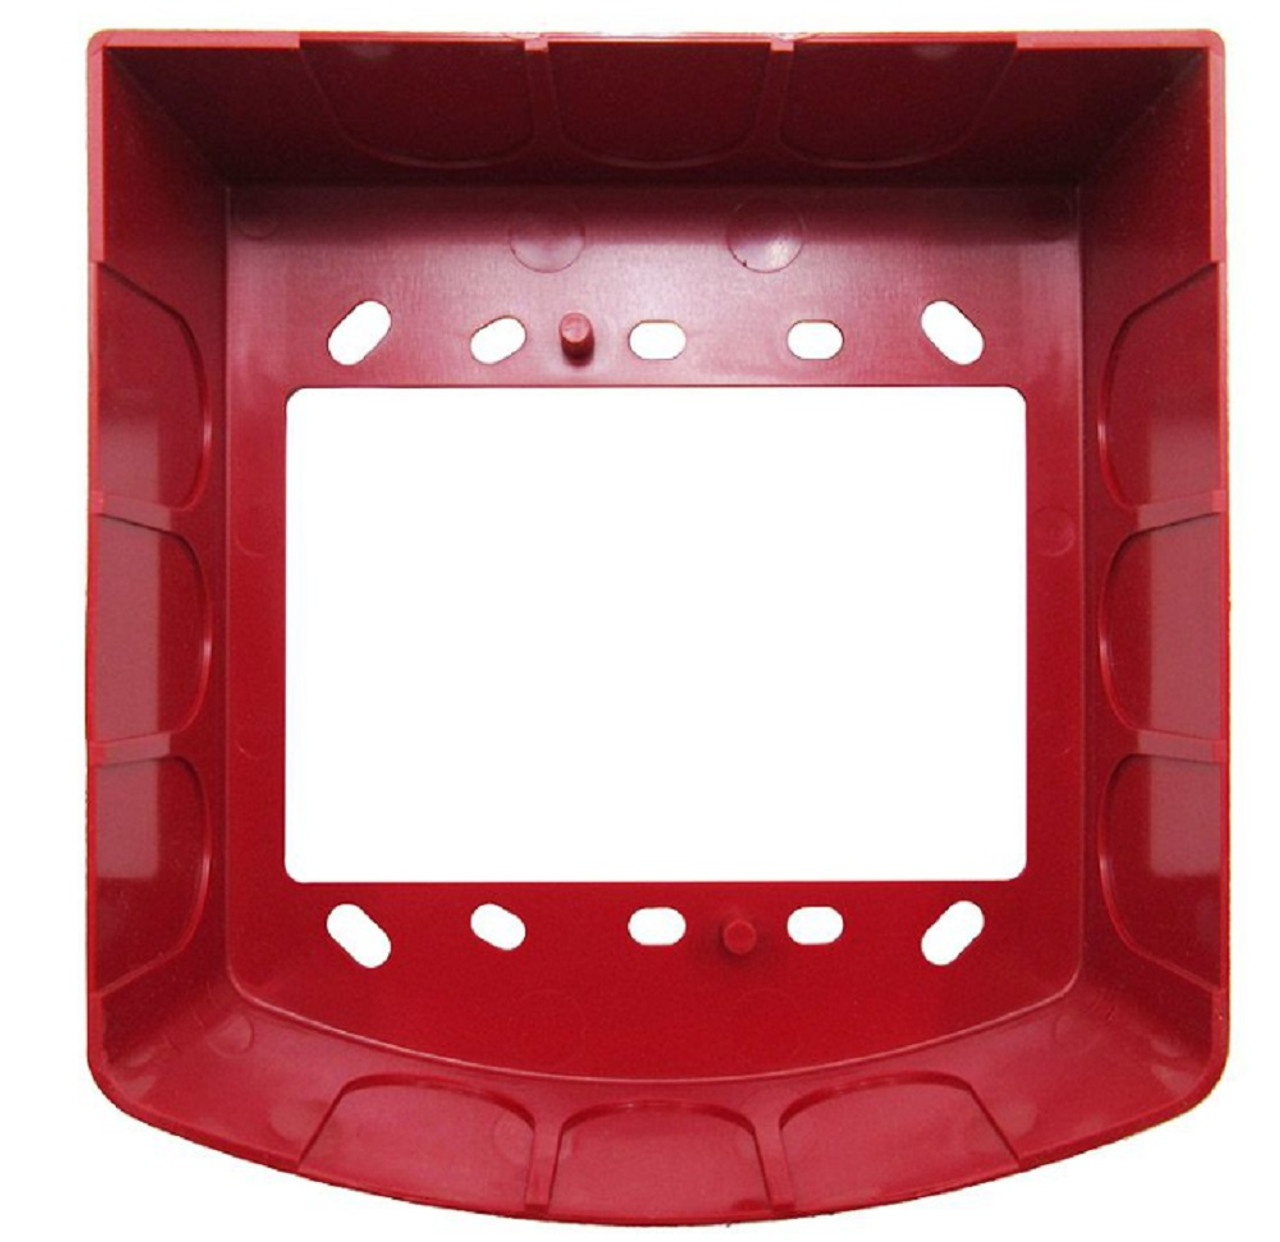 Simplex Grinnell 4905-9937 742-295 Surface Mount Red Adapter Skirt [New]